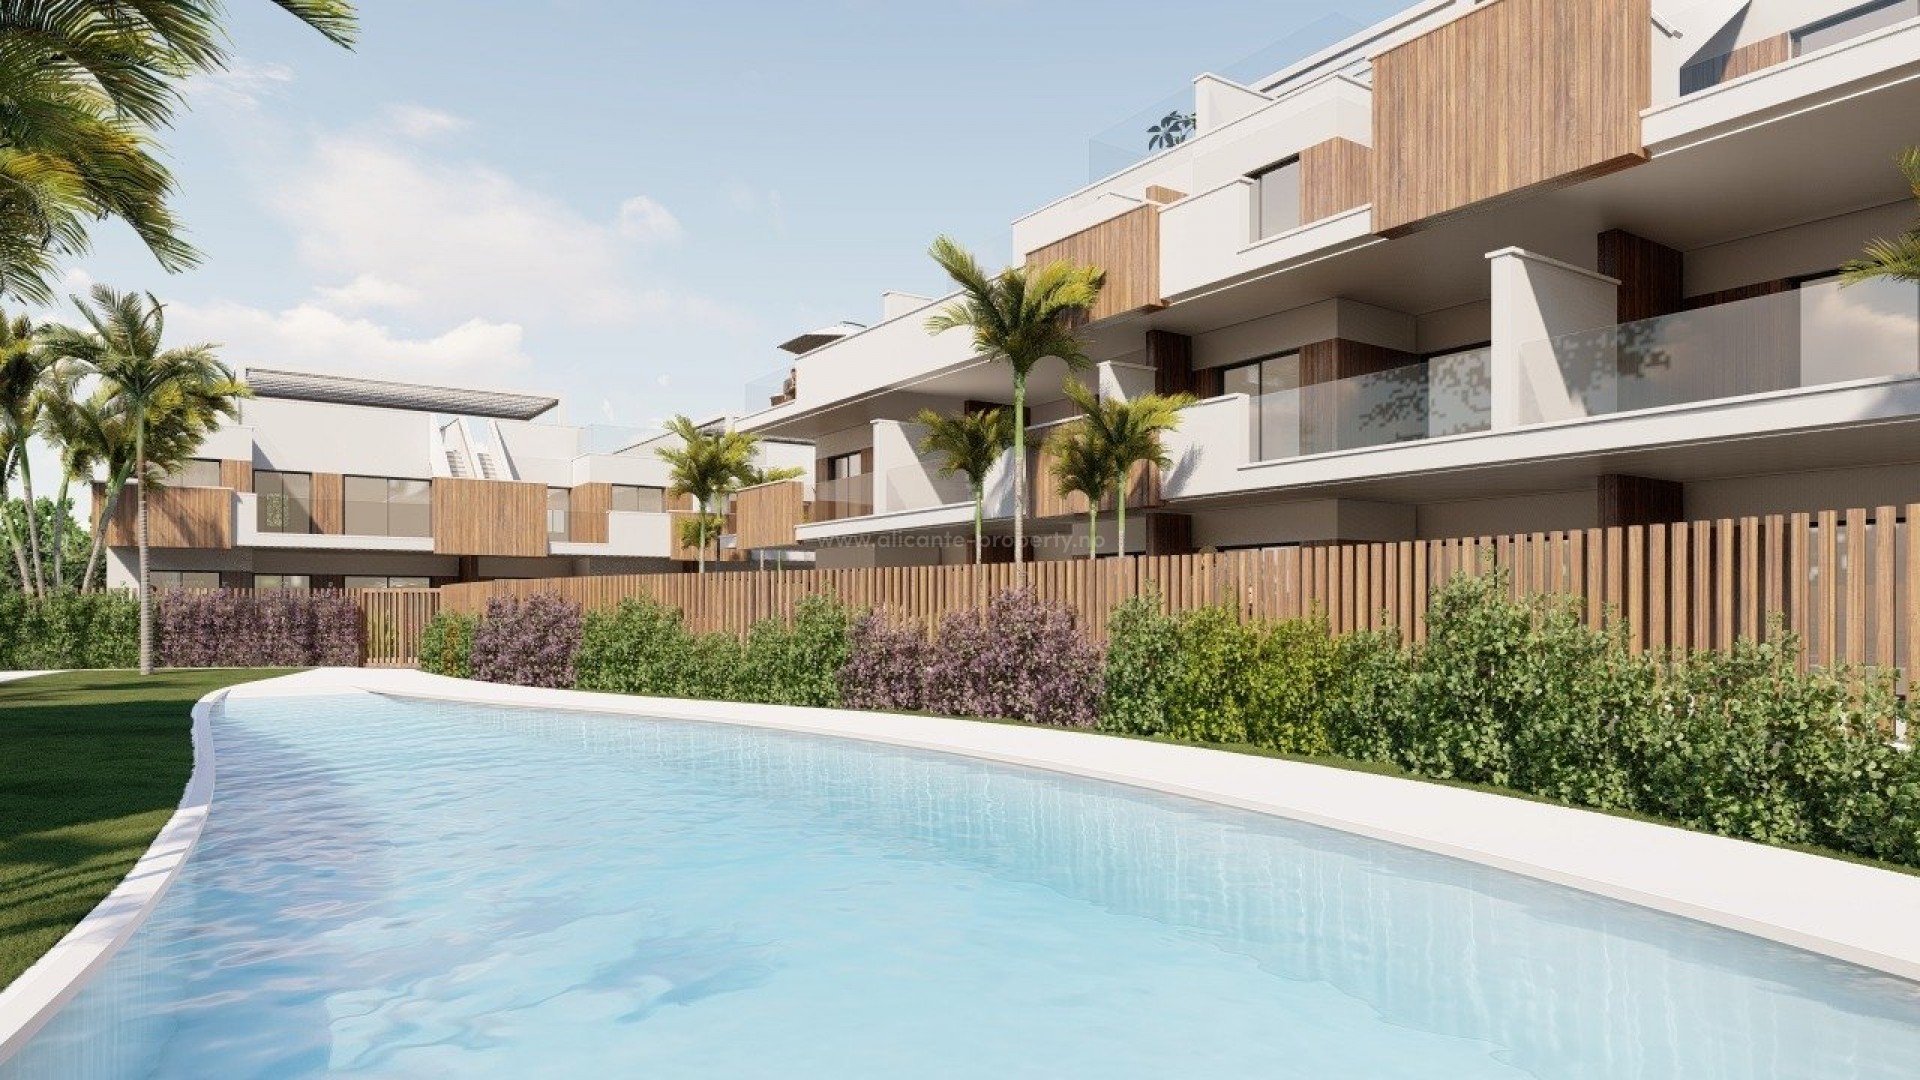 Modern apartments and bungalow in Pilar de La Horadada, 2/3 bedrooms, 2 bathrooms, large communal garden with pool, gym and playground